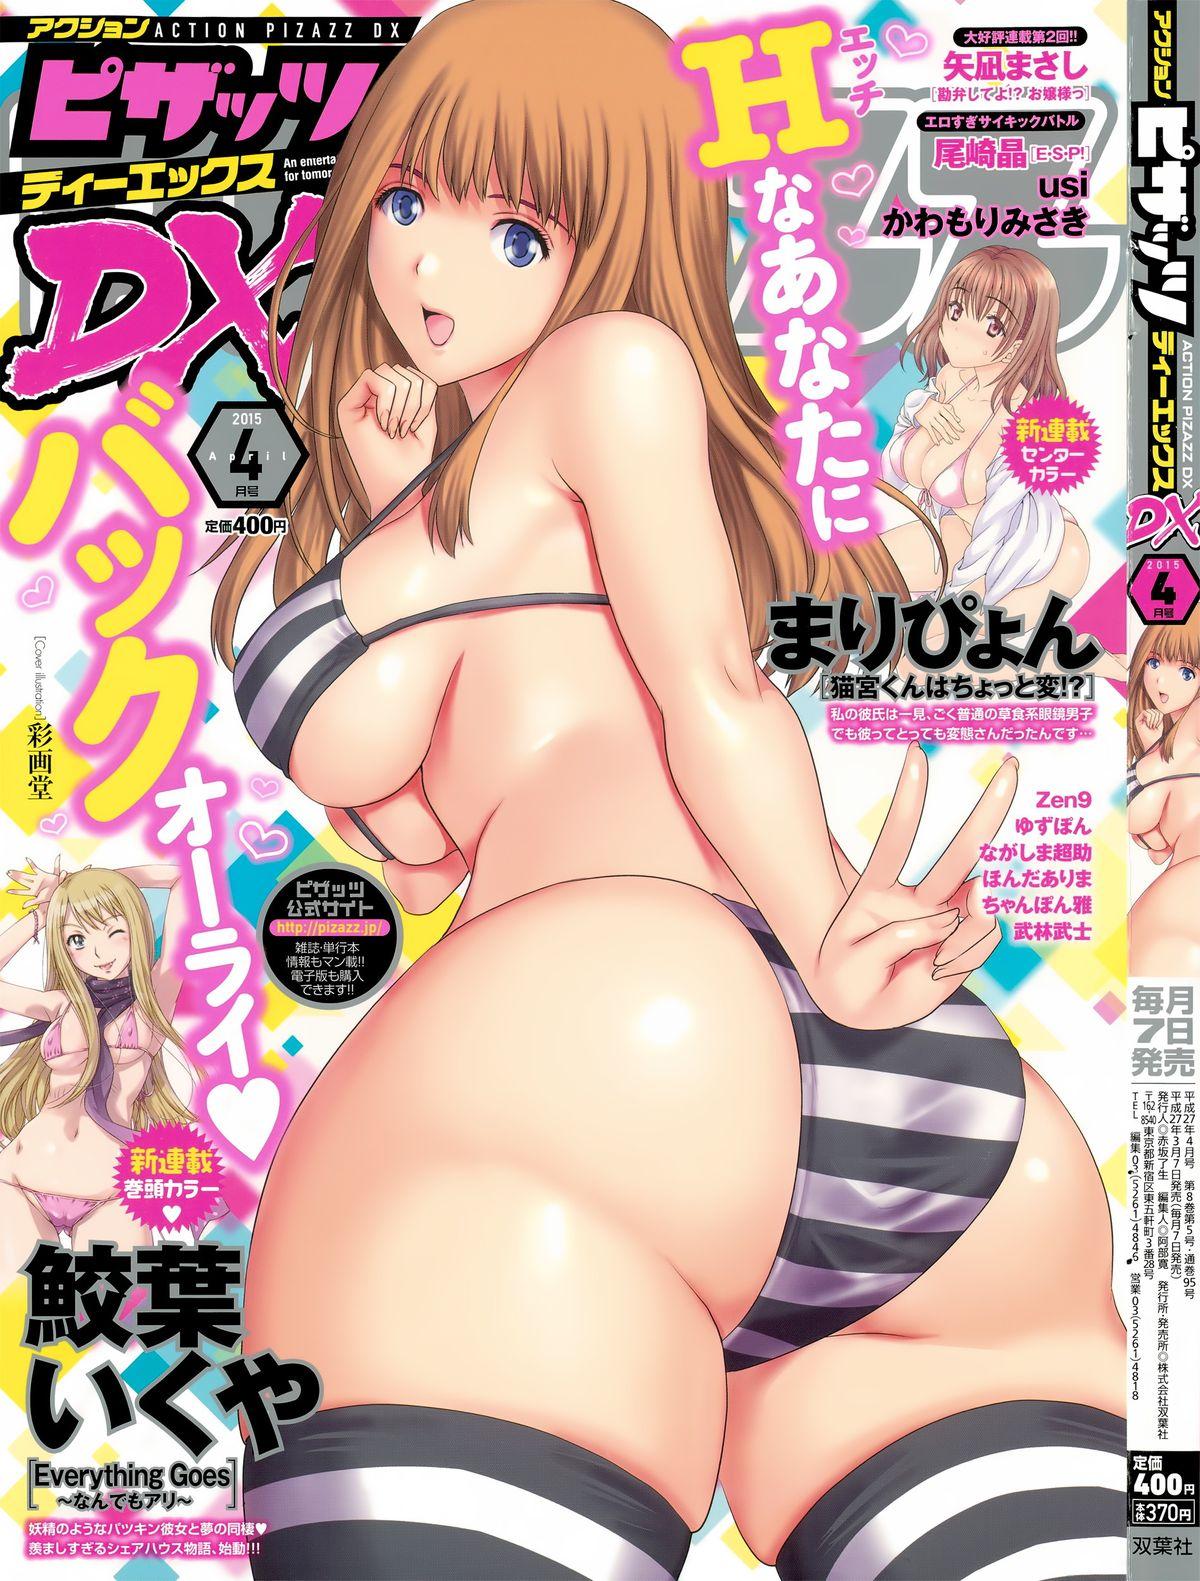 Teenage Action Pizazz DX 2015-04 Feet - Page 1